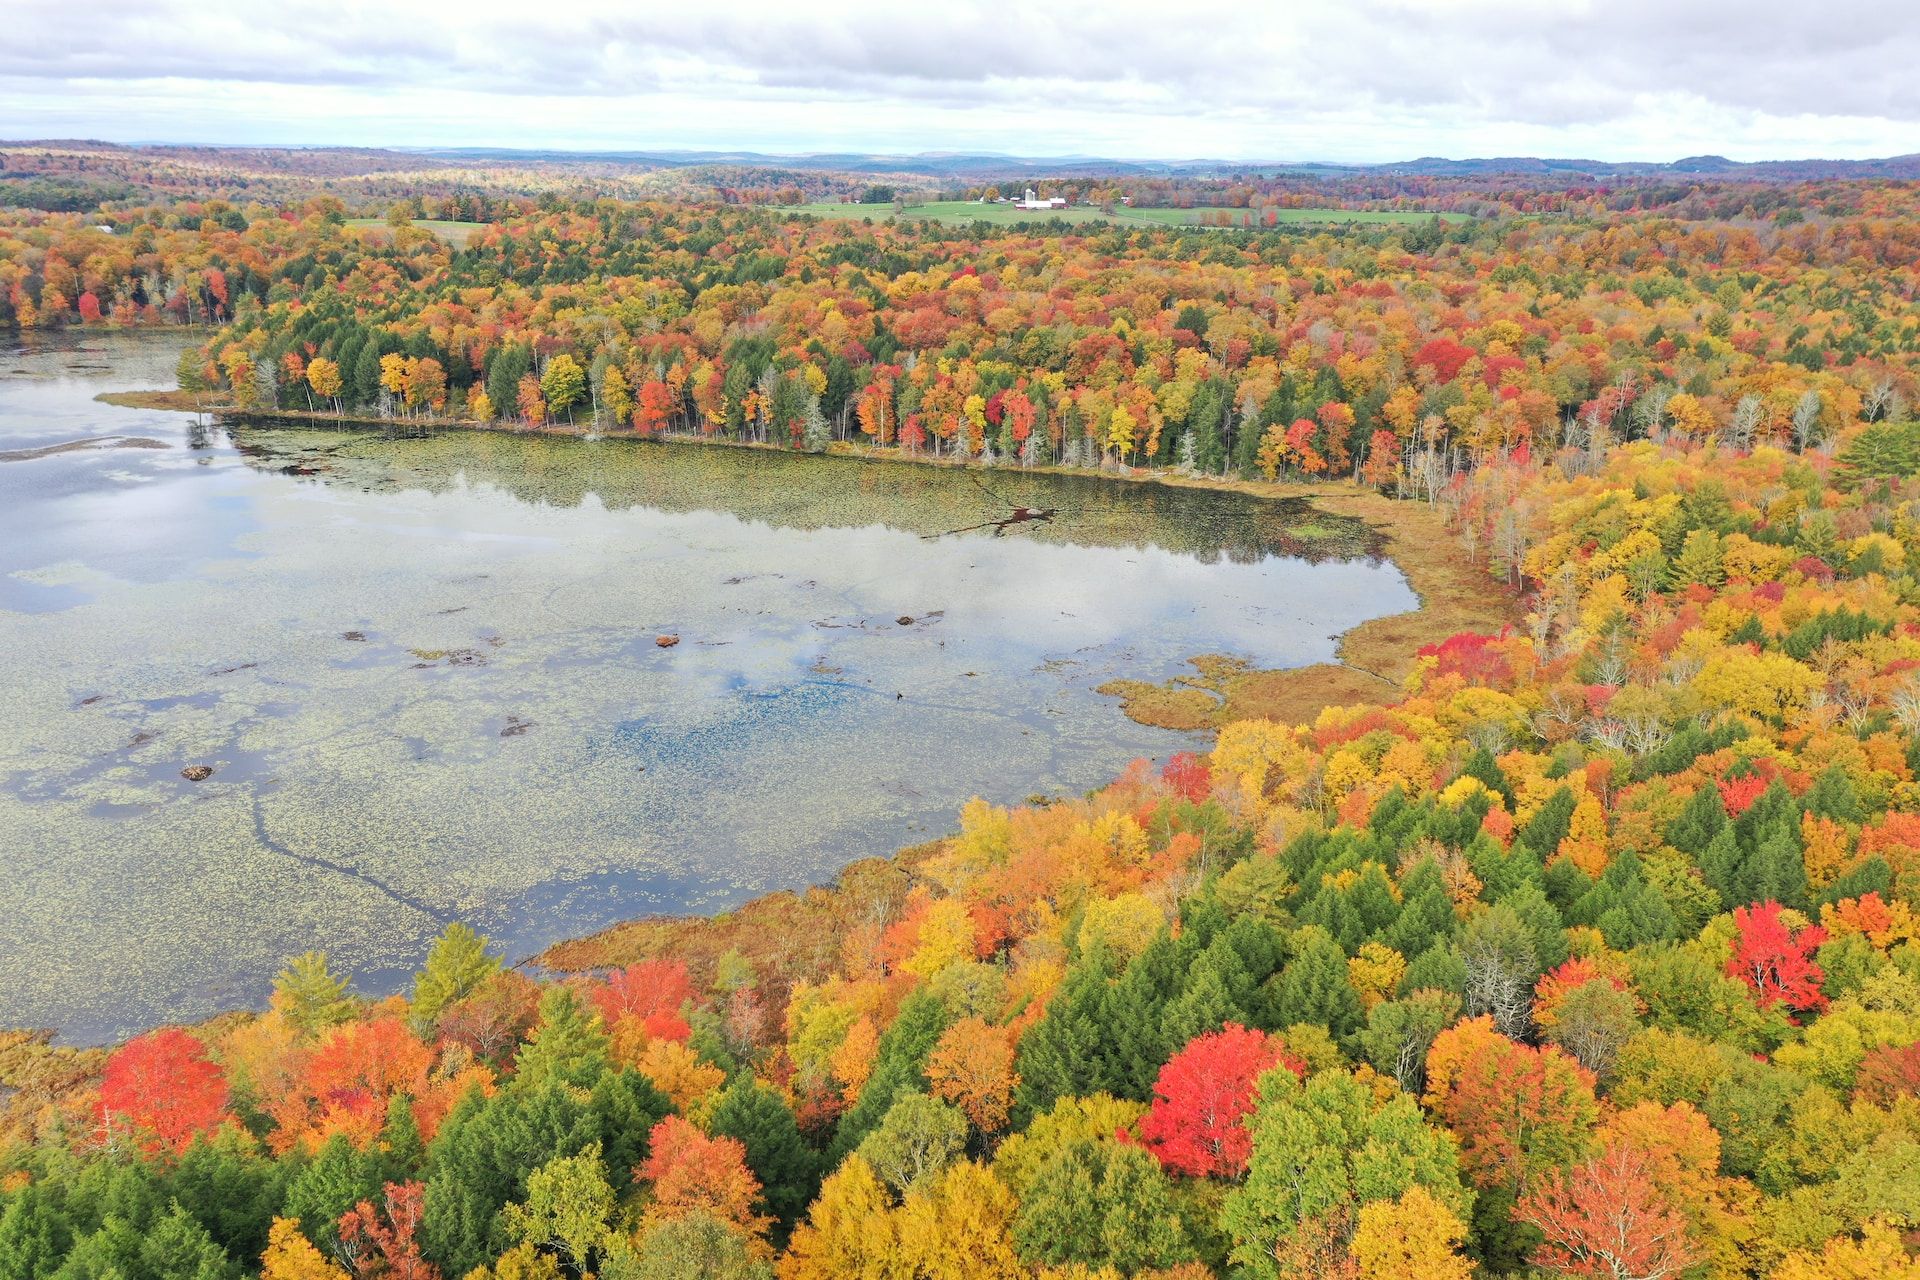 Trees with vibrant red, orange, and yellow foliage around a lake in Bethel, New York